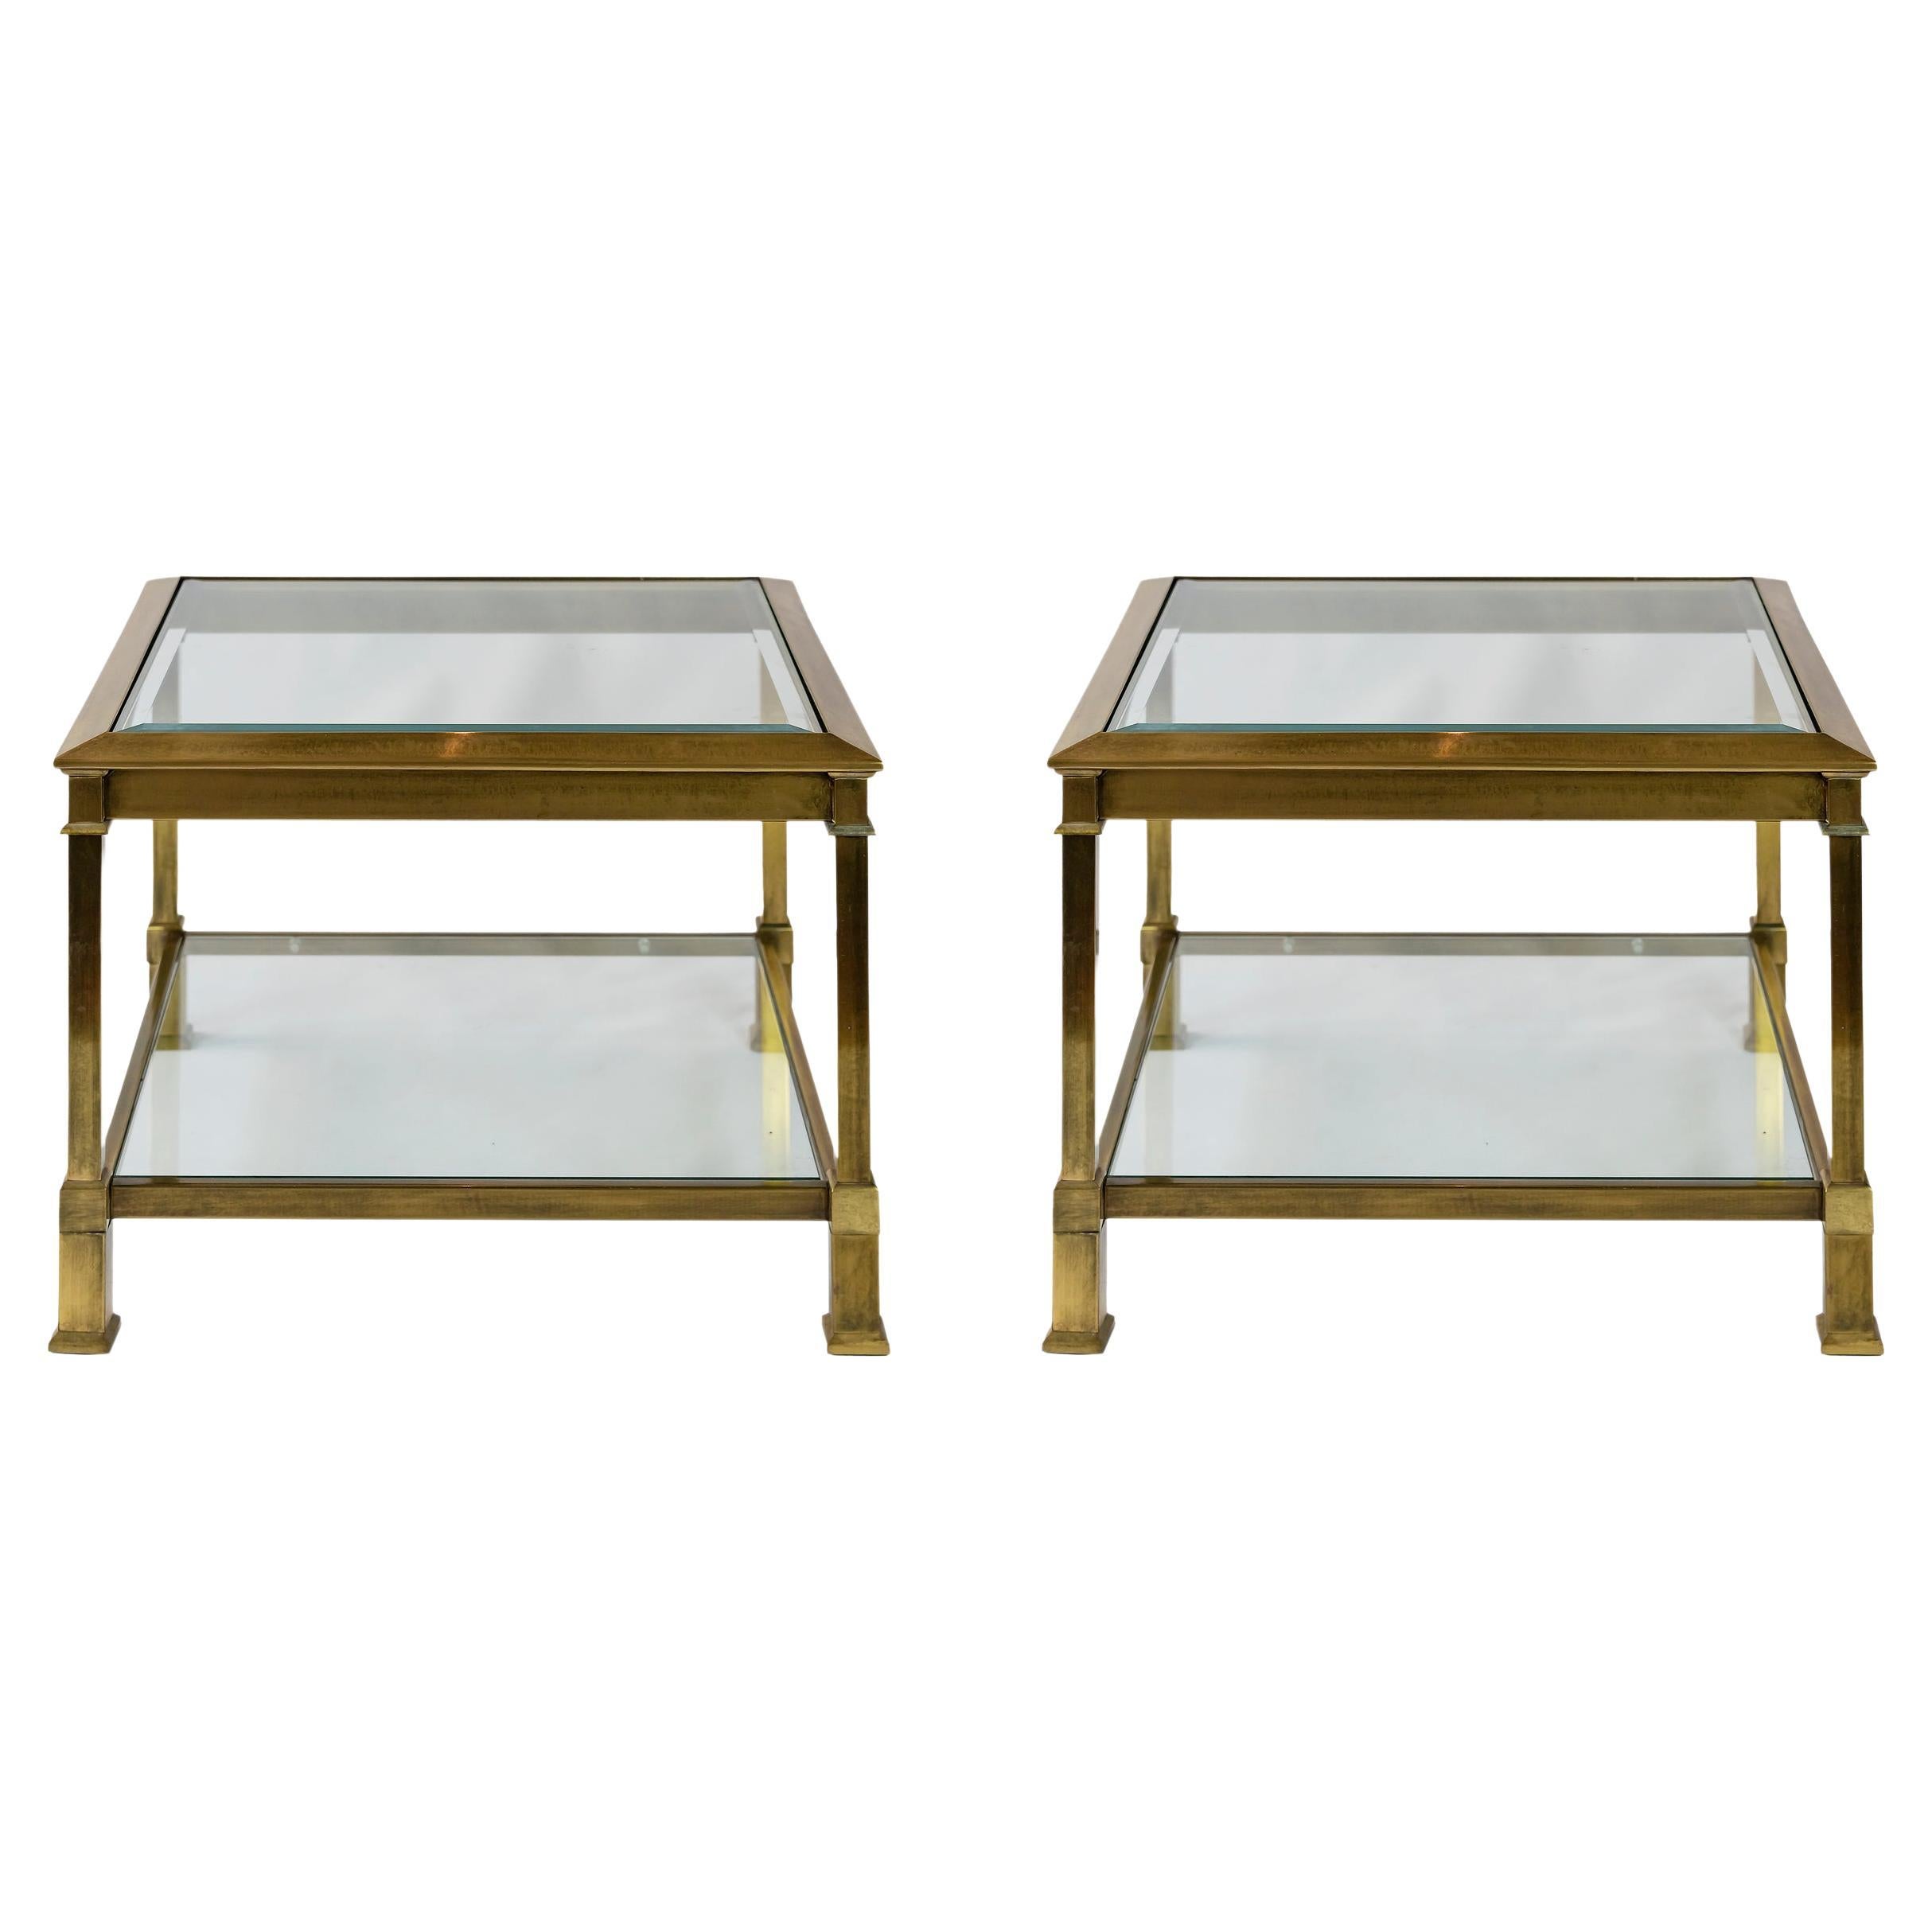 Pair of Mid-Century Brass and Glass Top Side Tables